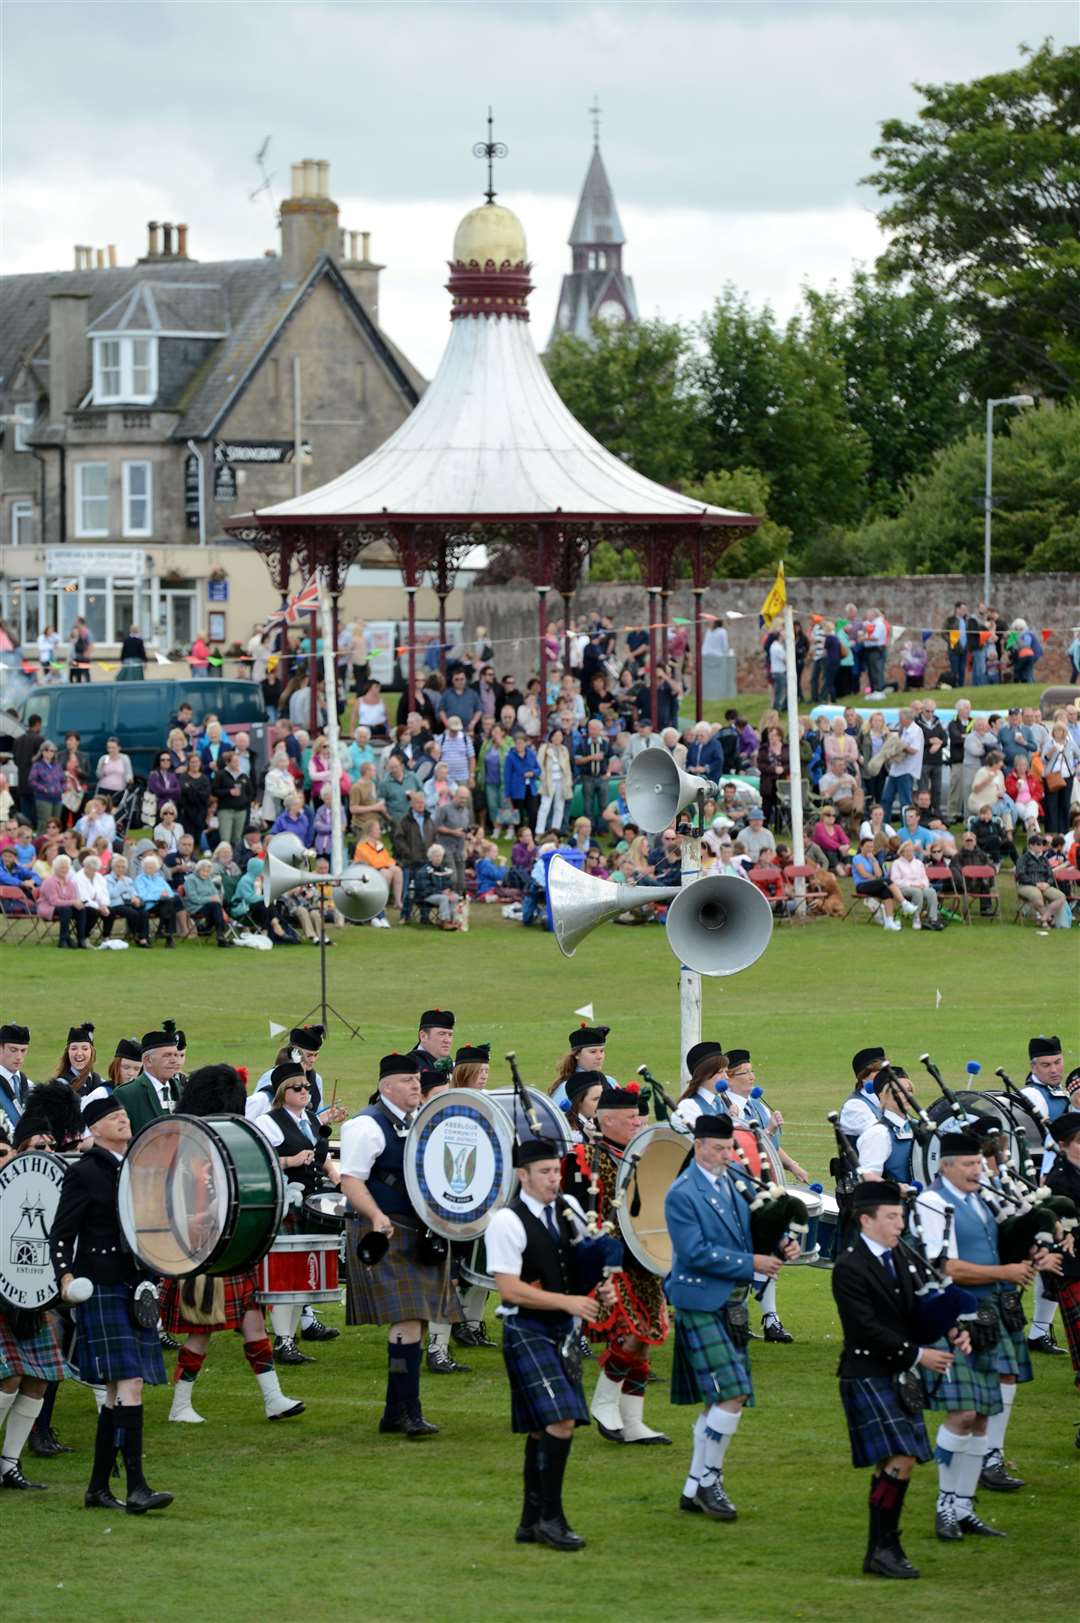 Big Crowds enjoy the sunshine at the shows and games in Nairn.